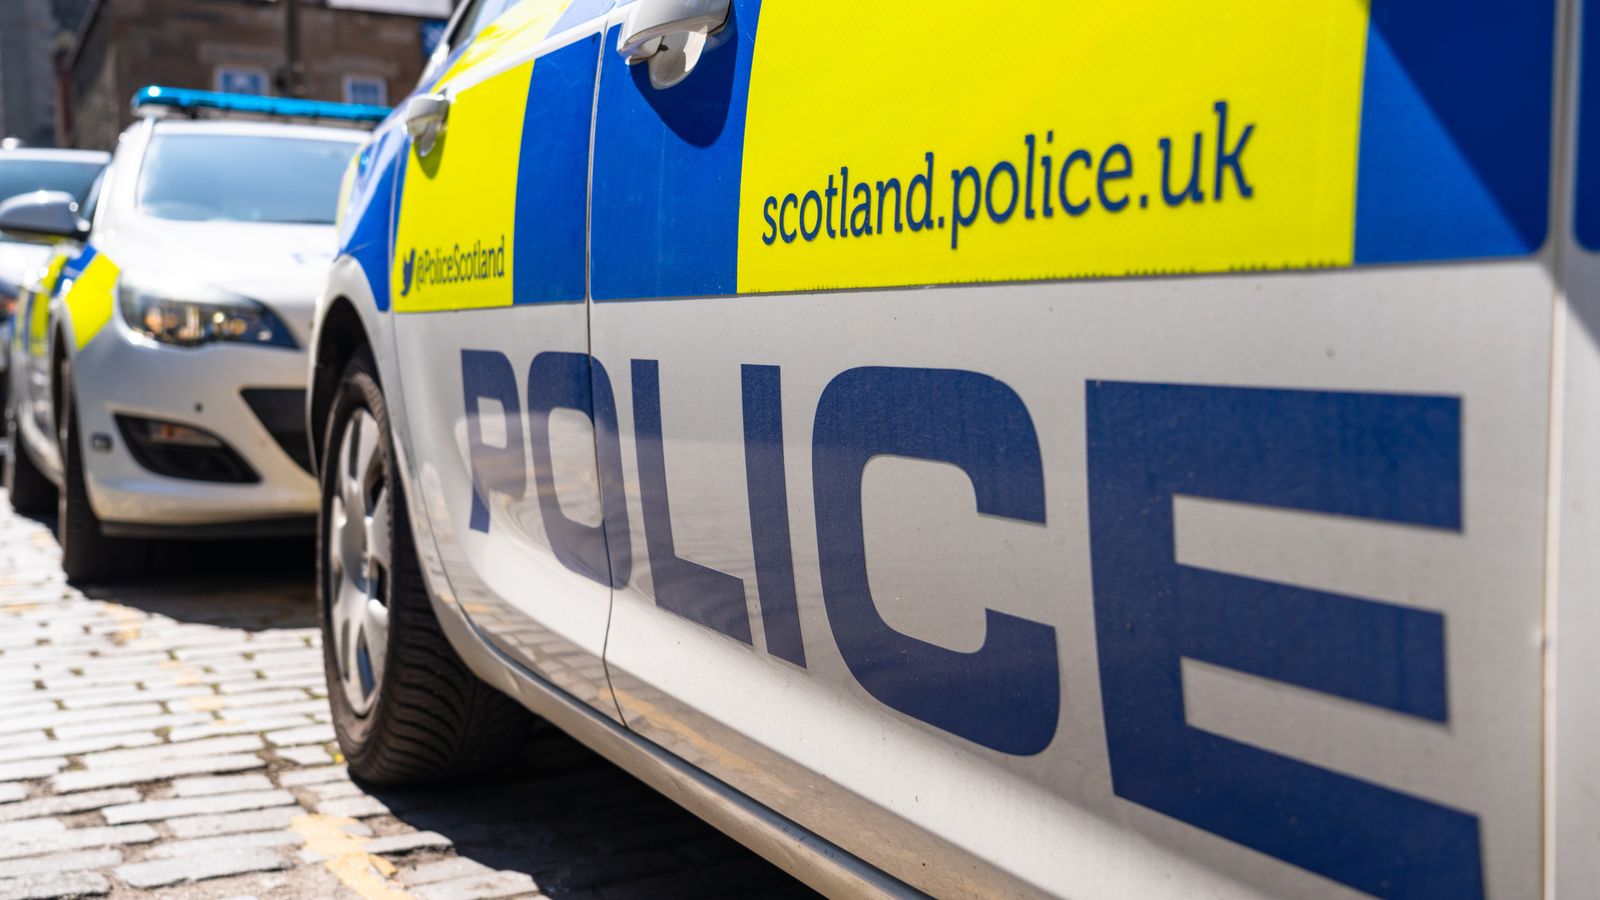 Boy, 15, charged over death of 70-year-old man in Glasgow